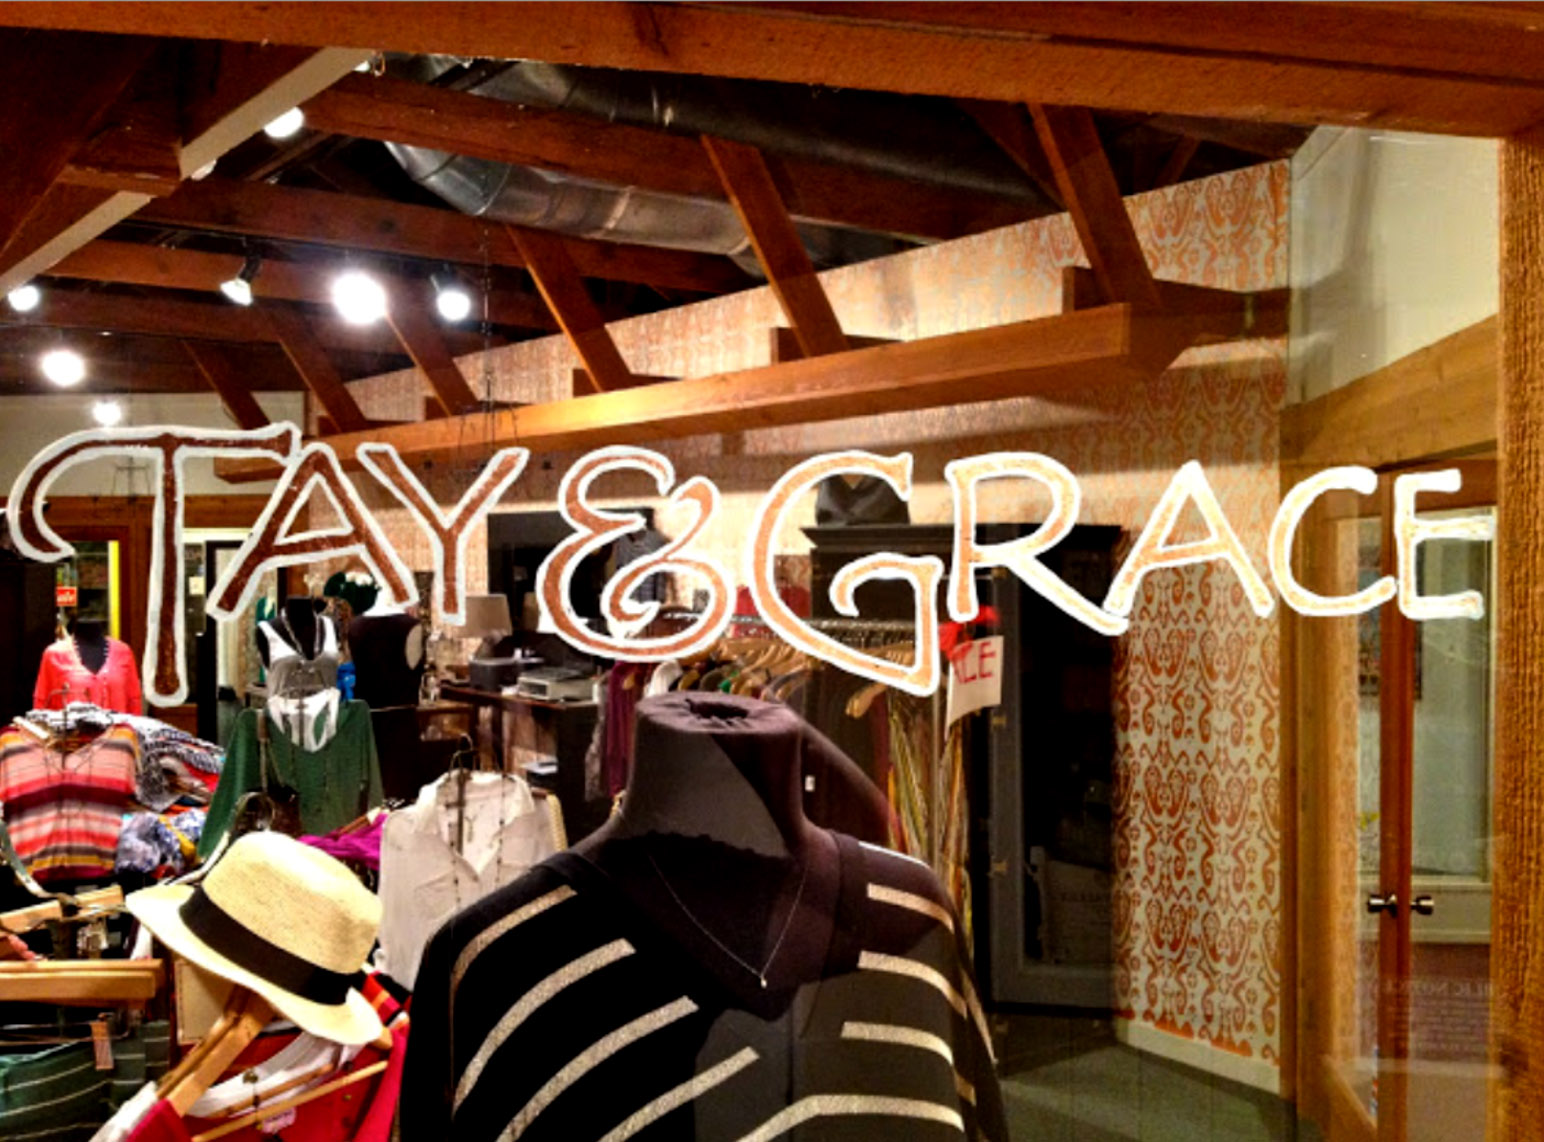 Tay and Grace Commercial Retail.jpg